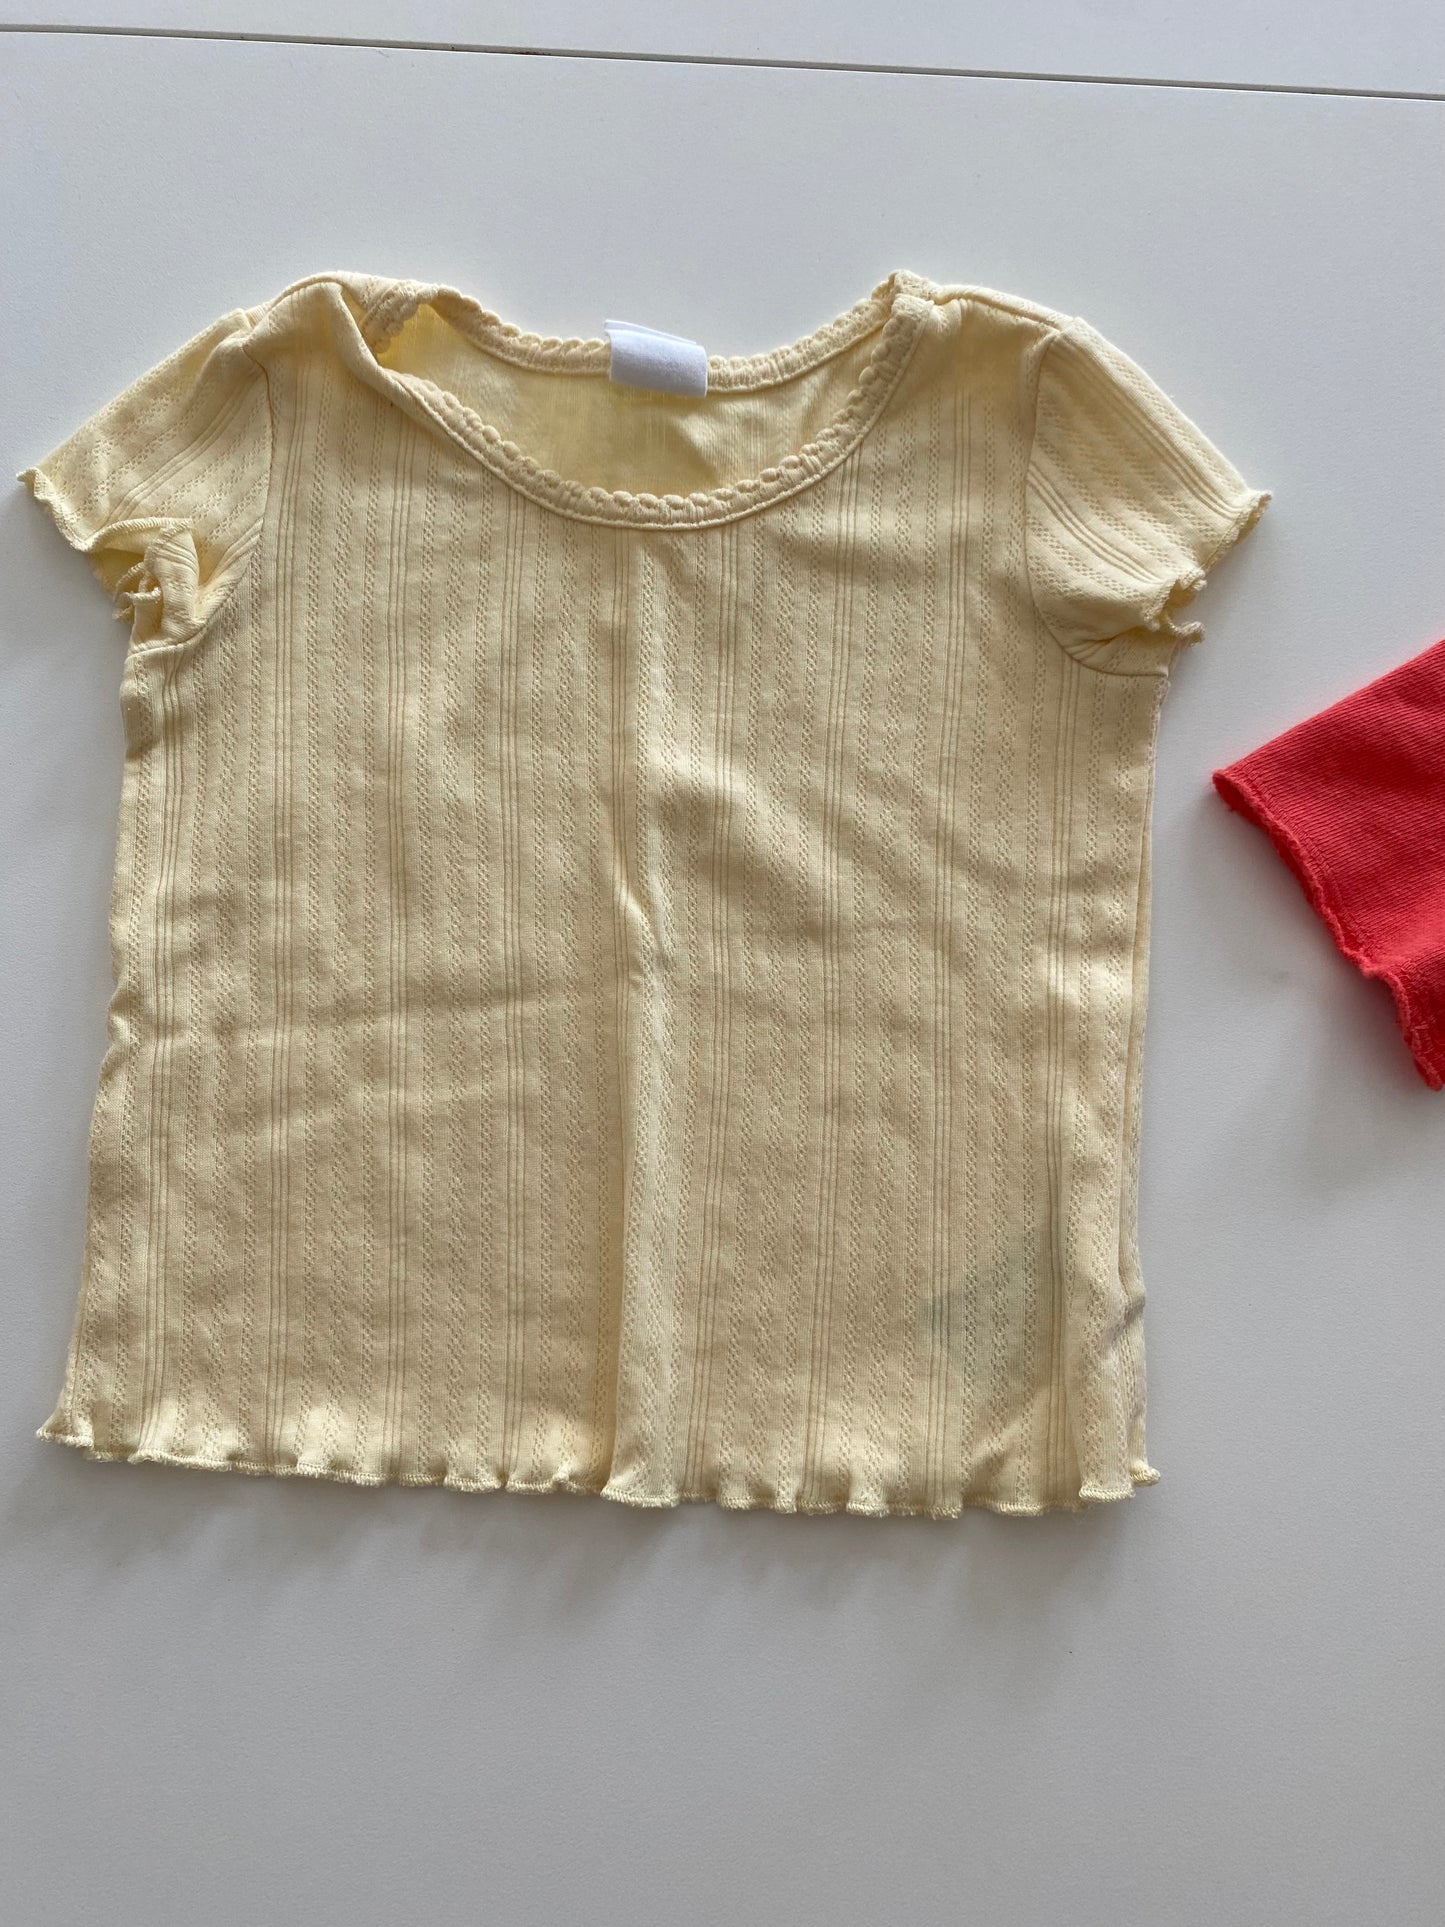 Splendid Coral/Red crop top girls 2T and Gap yellow pointelle t-shirt girls 18-24M